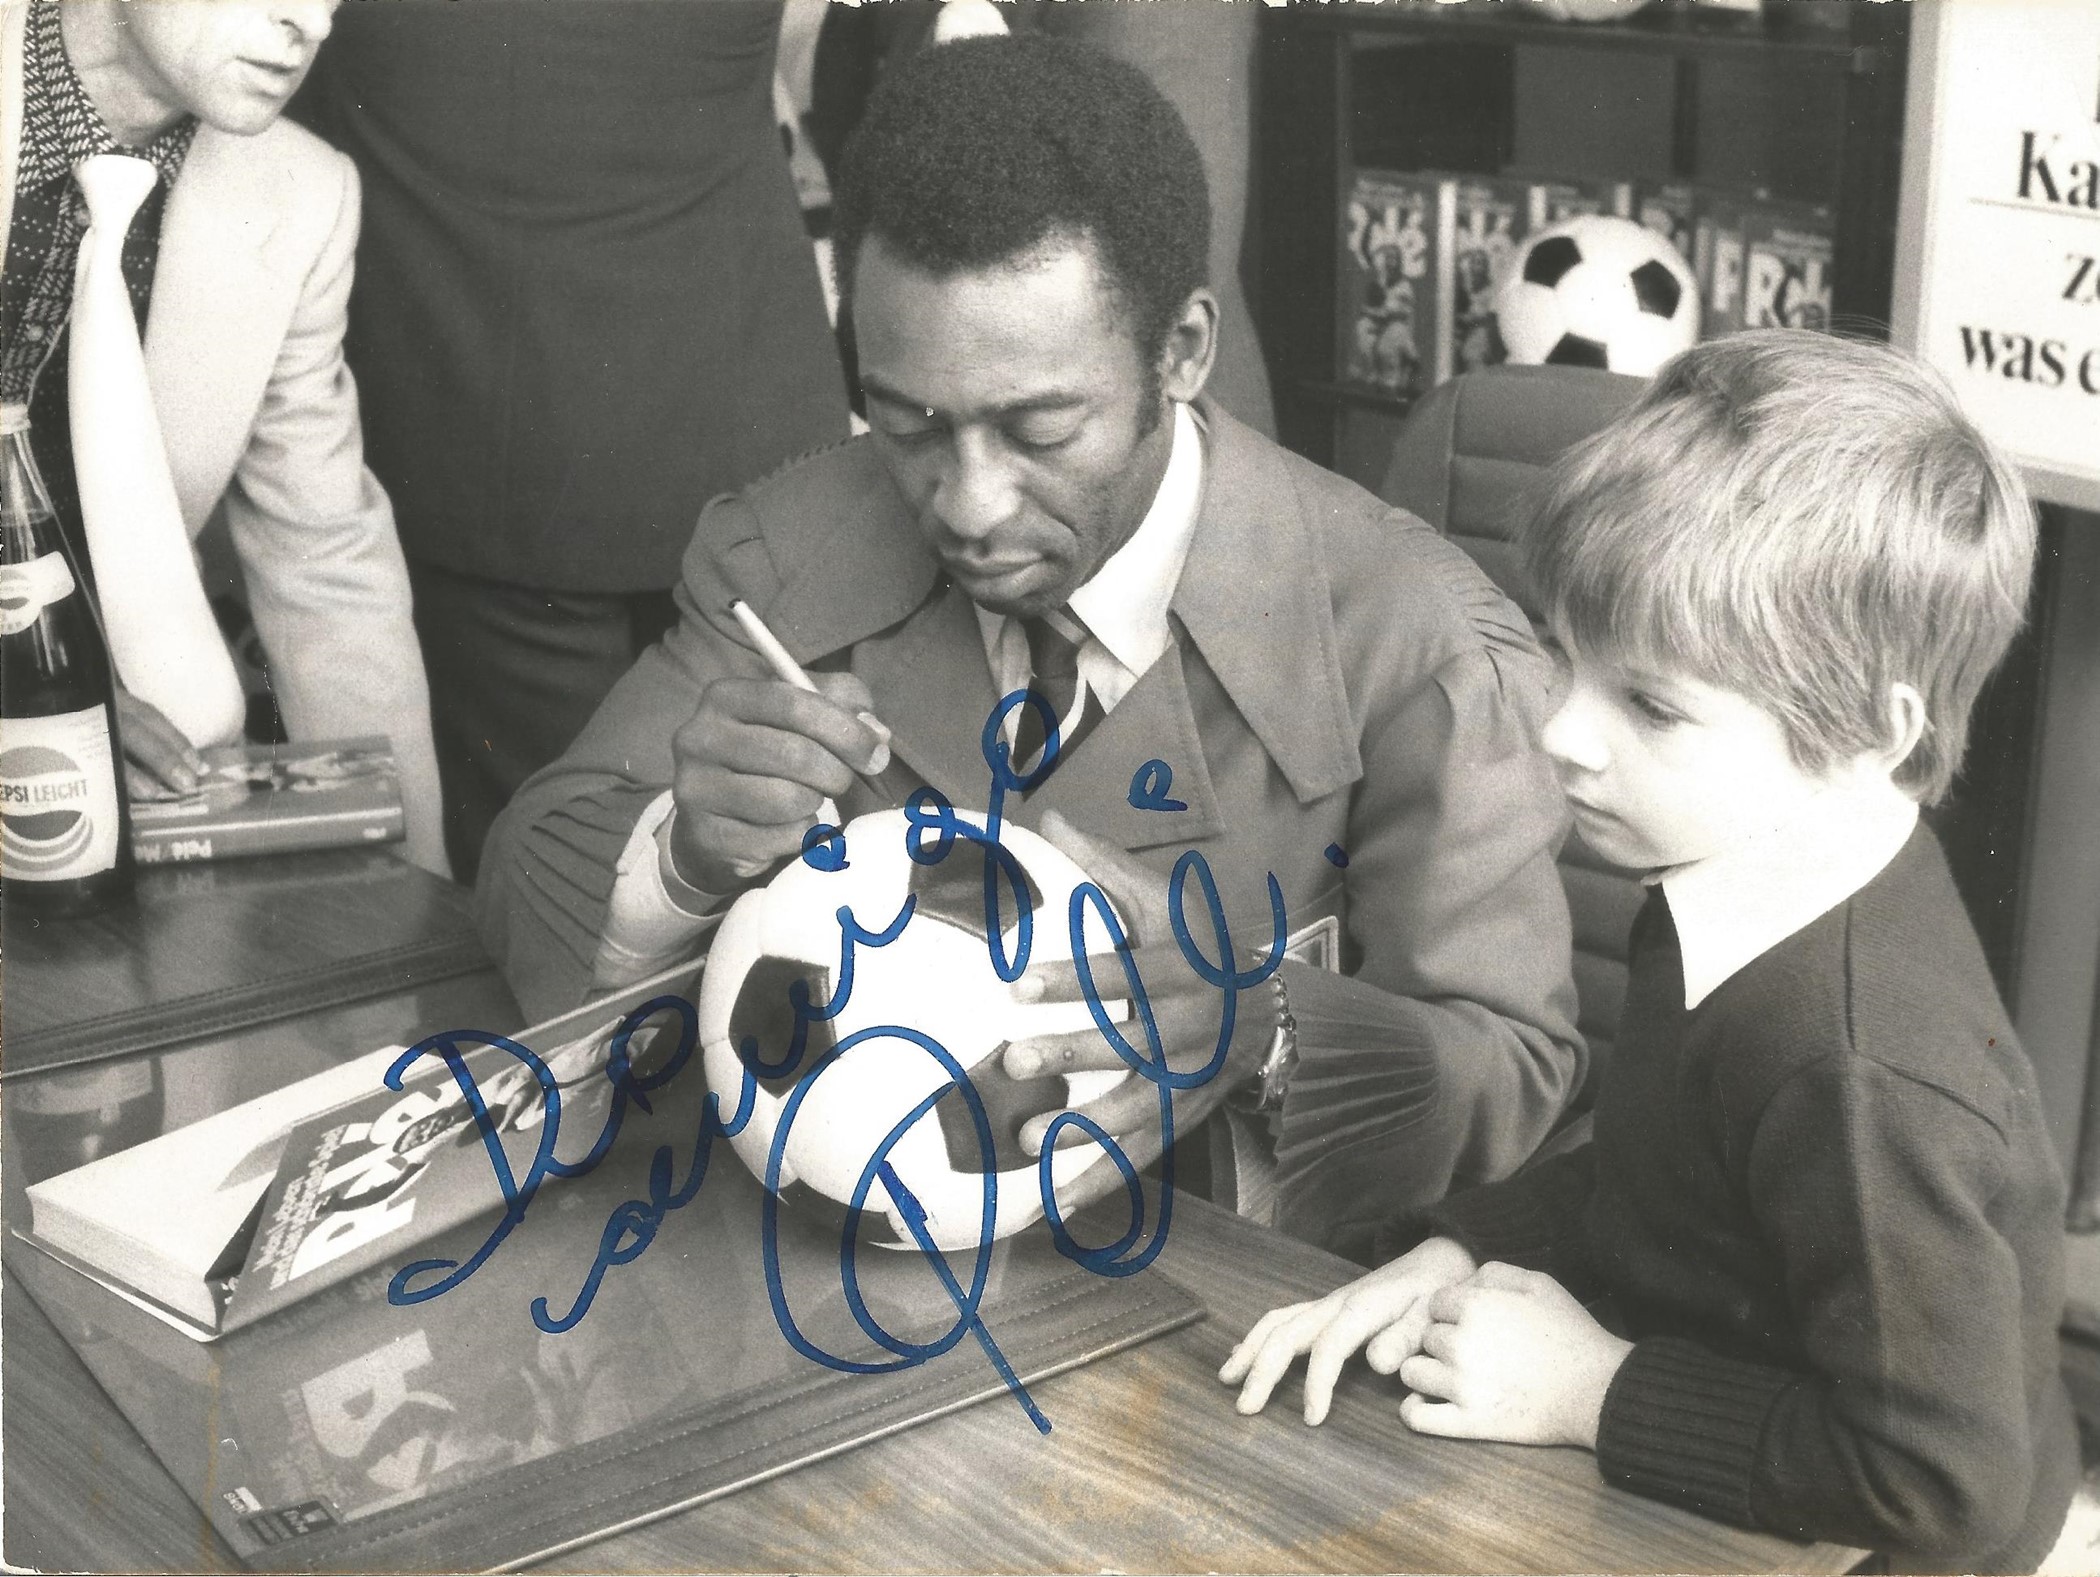 Football legend Pele signed nice vintage 8 x 6 inch black and white photo, signing a football for